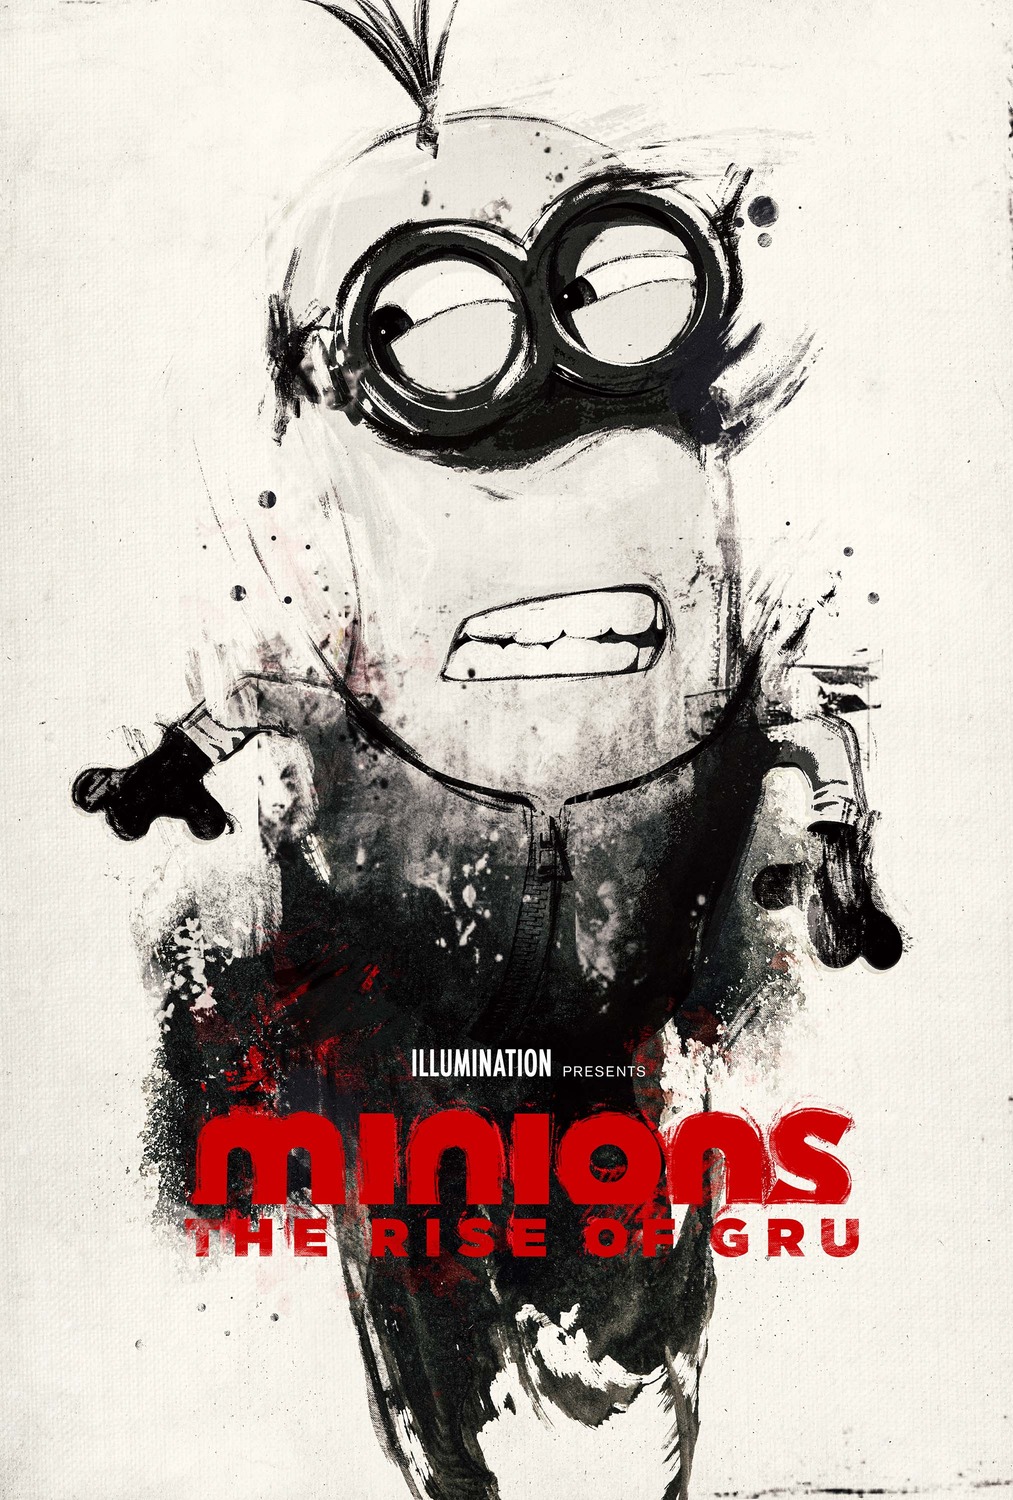 Extra Large Movie Poster Image for Minions: The Rise of Gru (#36 of 45)